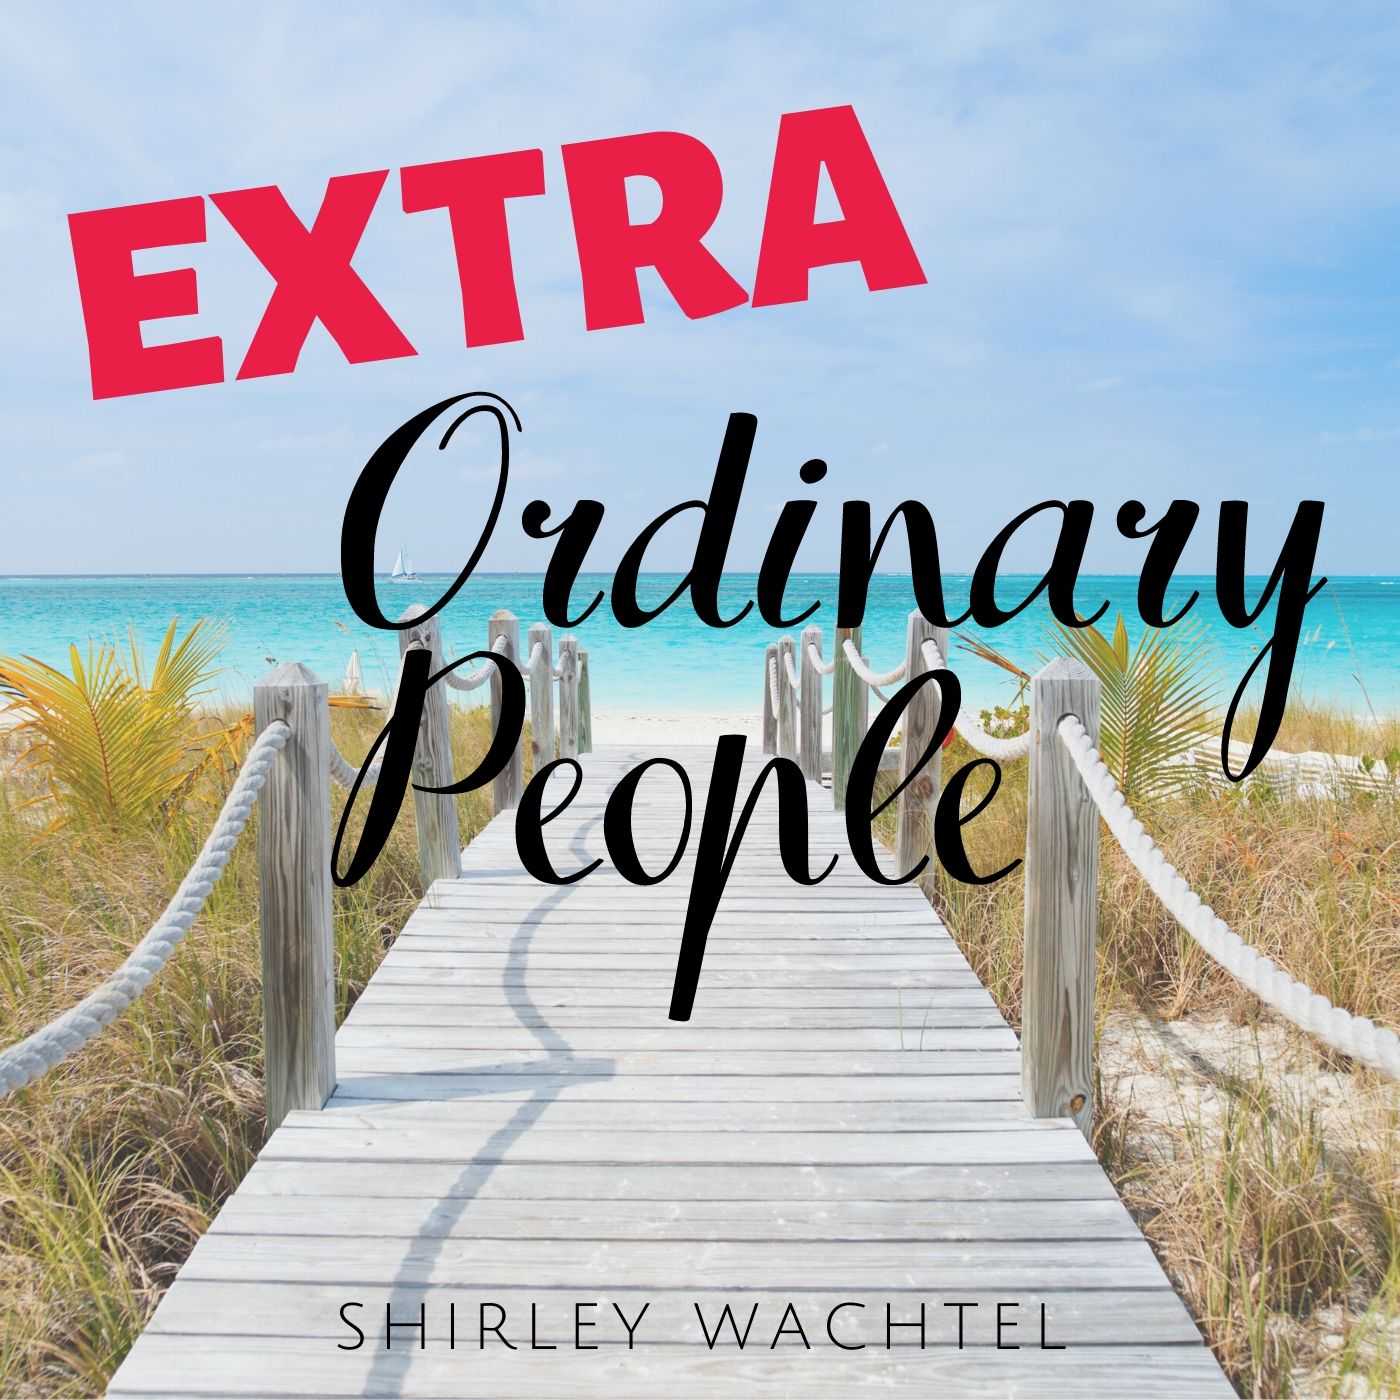 Show artwork for EXTRAordinary PEOPLE